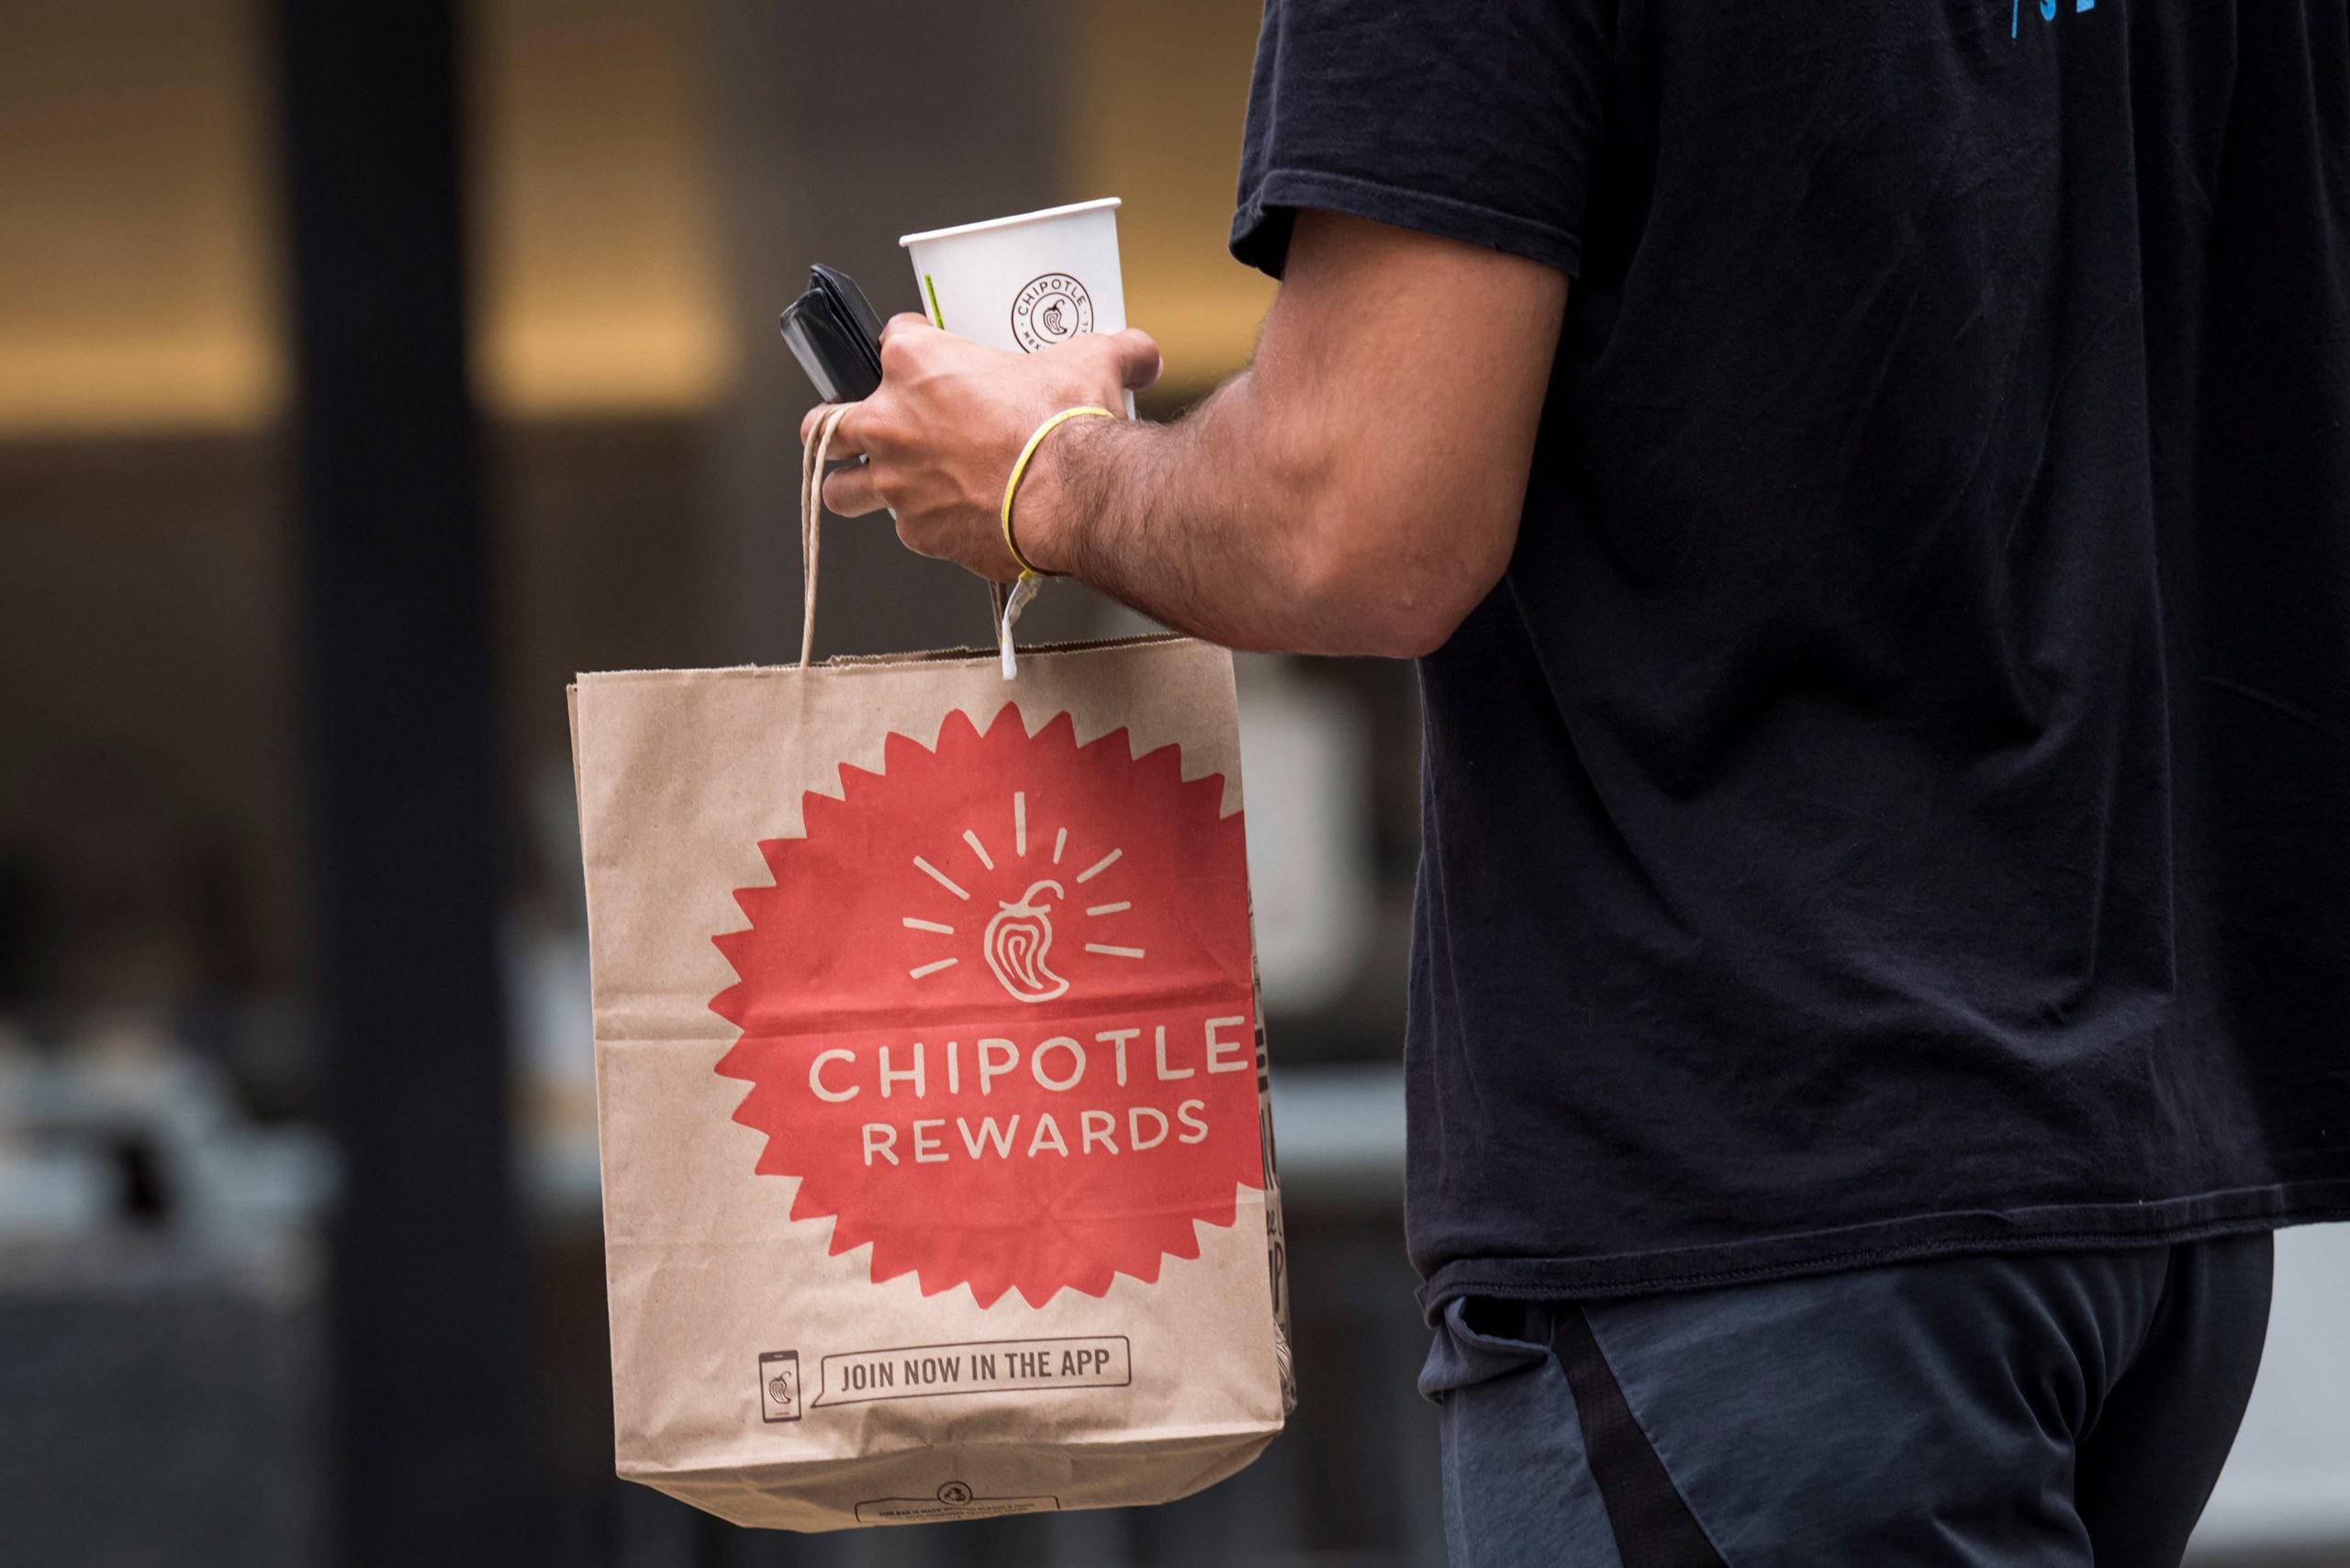 Chipotle Mexican Grill (CMG) Q3 2020 earnings high estimates